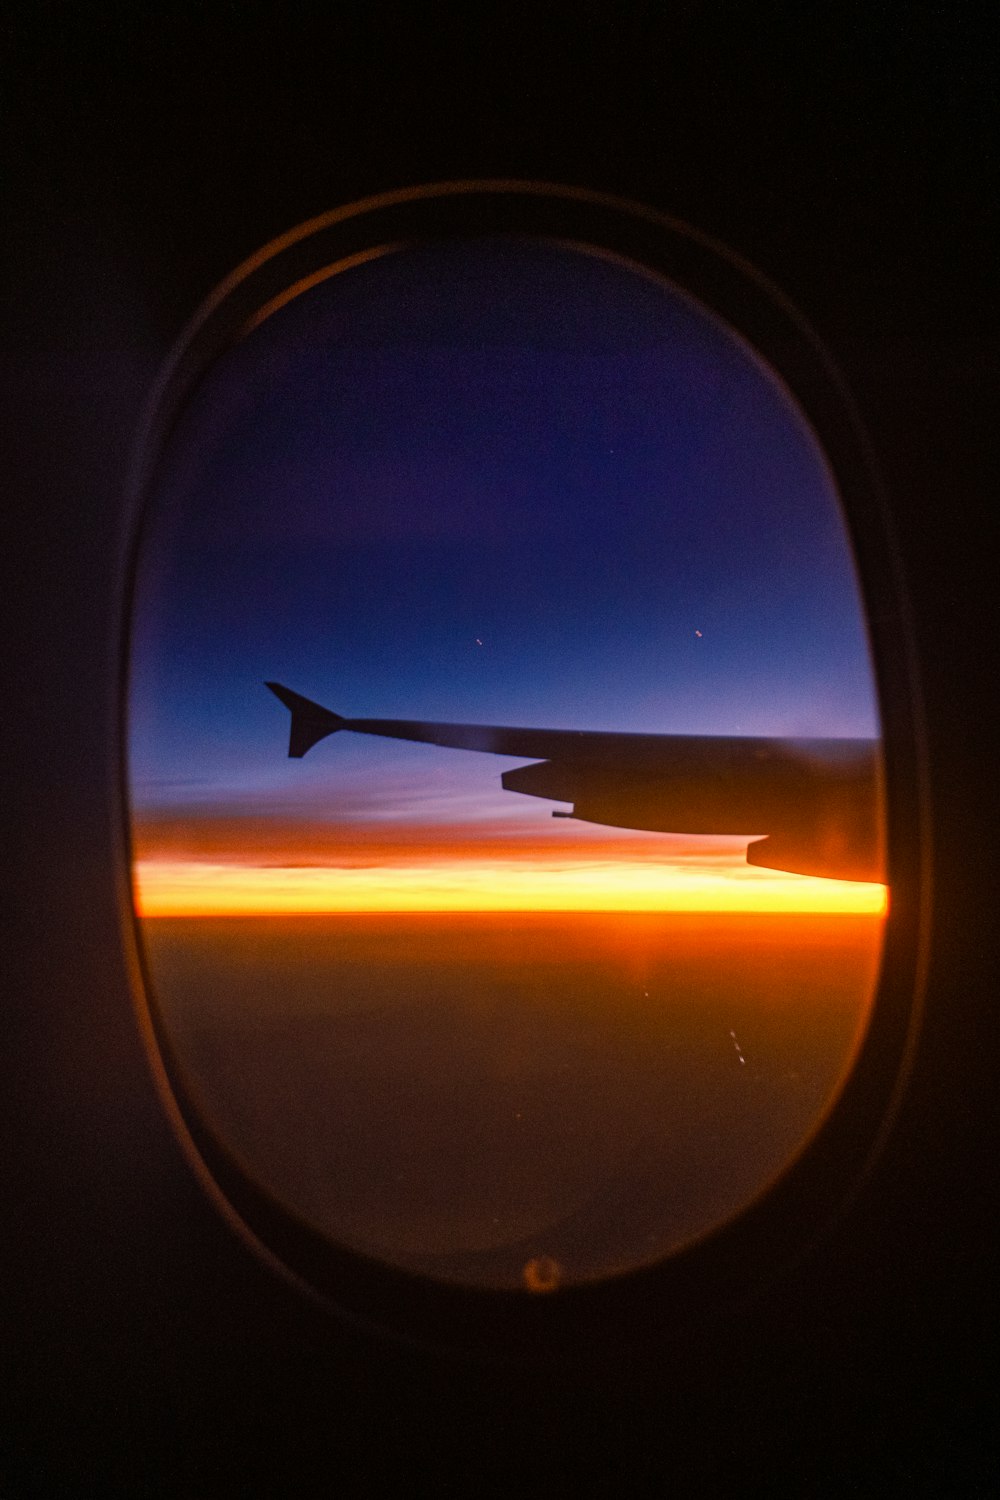 a view of the wing of an airplane at night